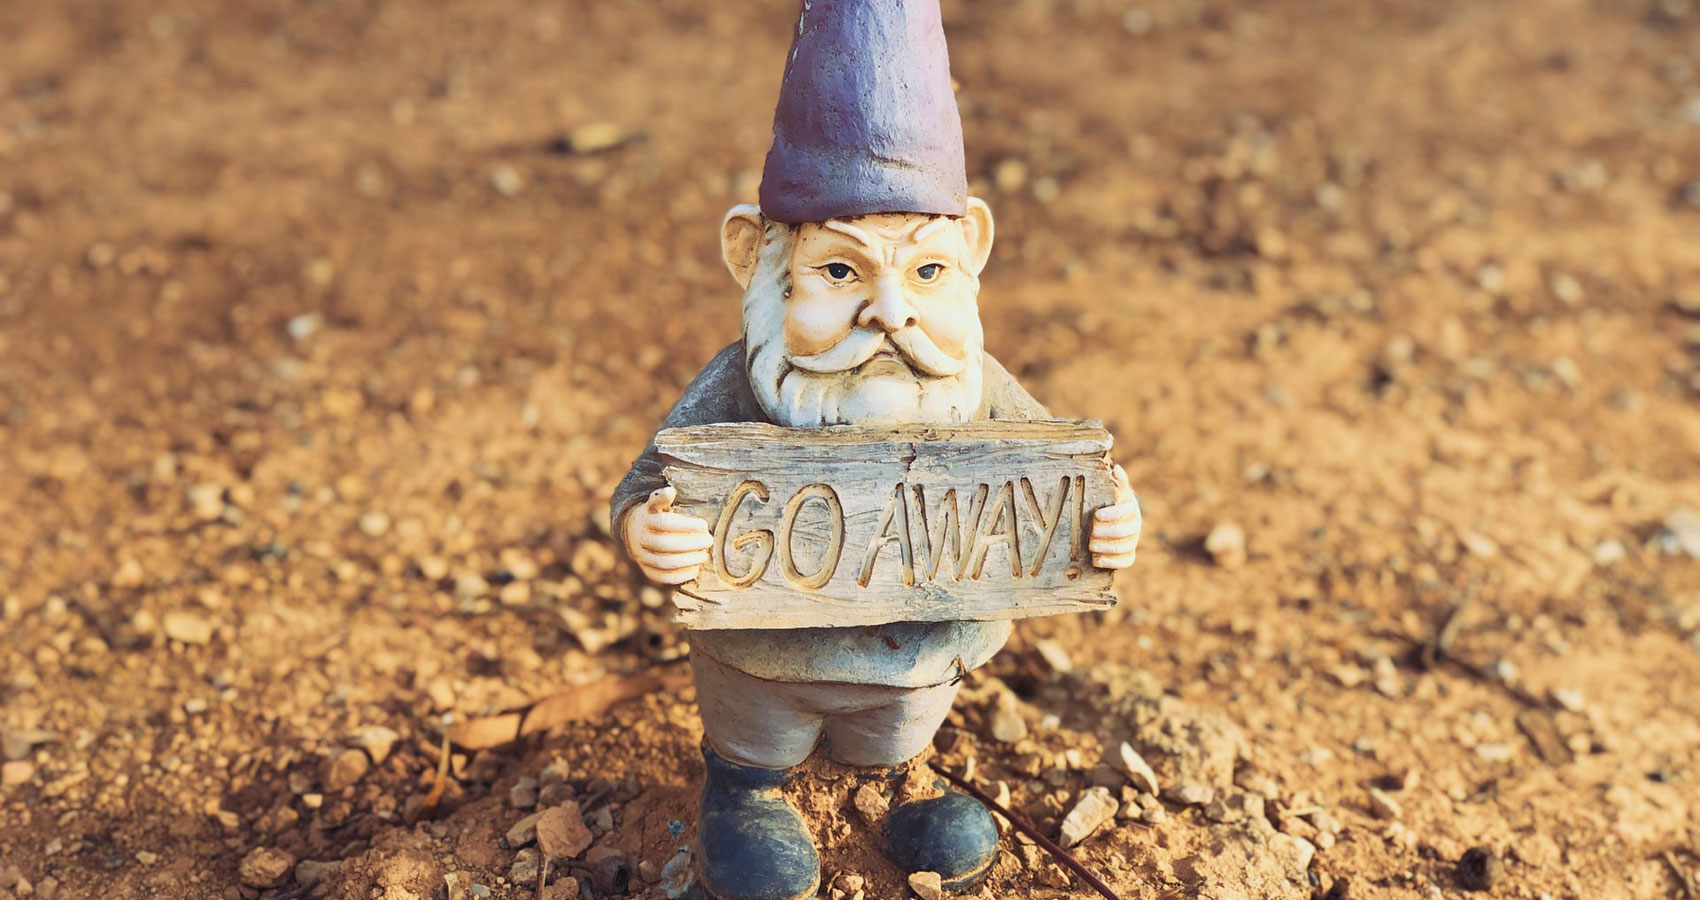 The "Go Away" Gnome, poetry by Andrada Costoiu at Spillwords.com